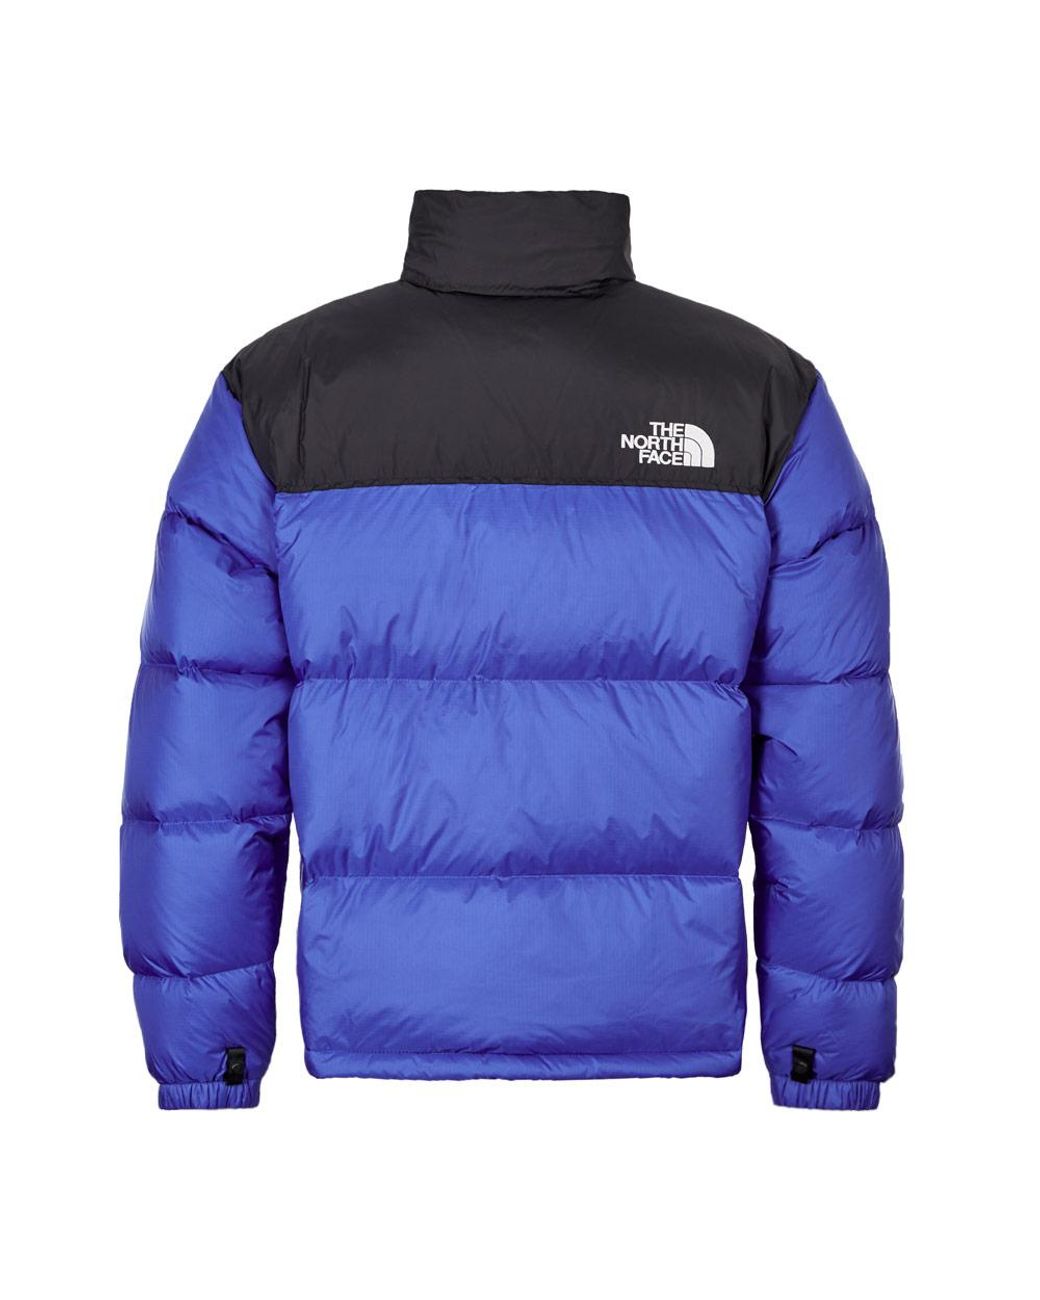 The North Face 1990 Retro Nupste Puffer Jacket In Purple | lupon.gov.ph